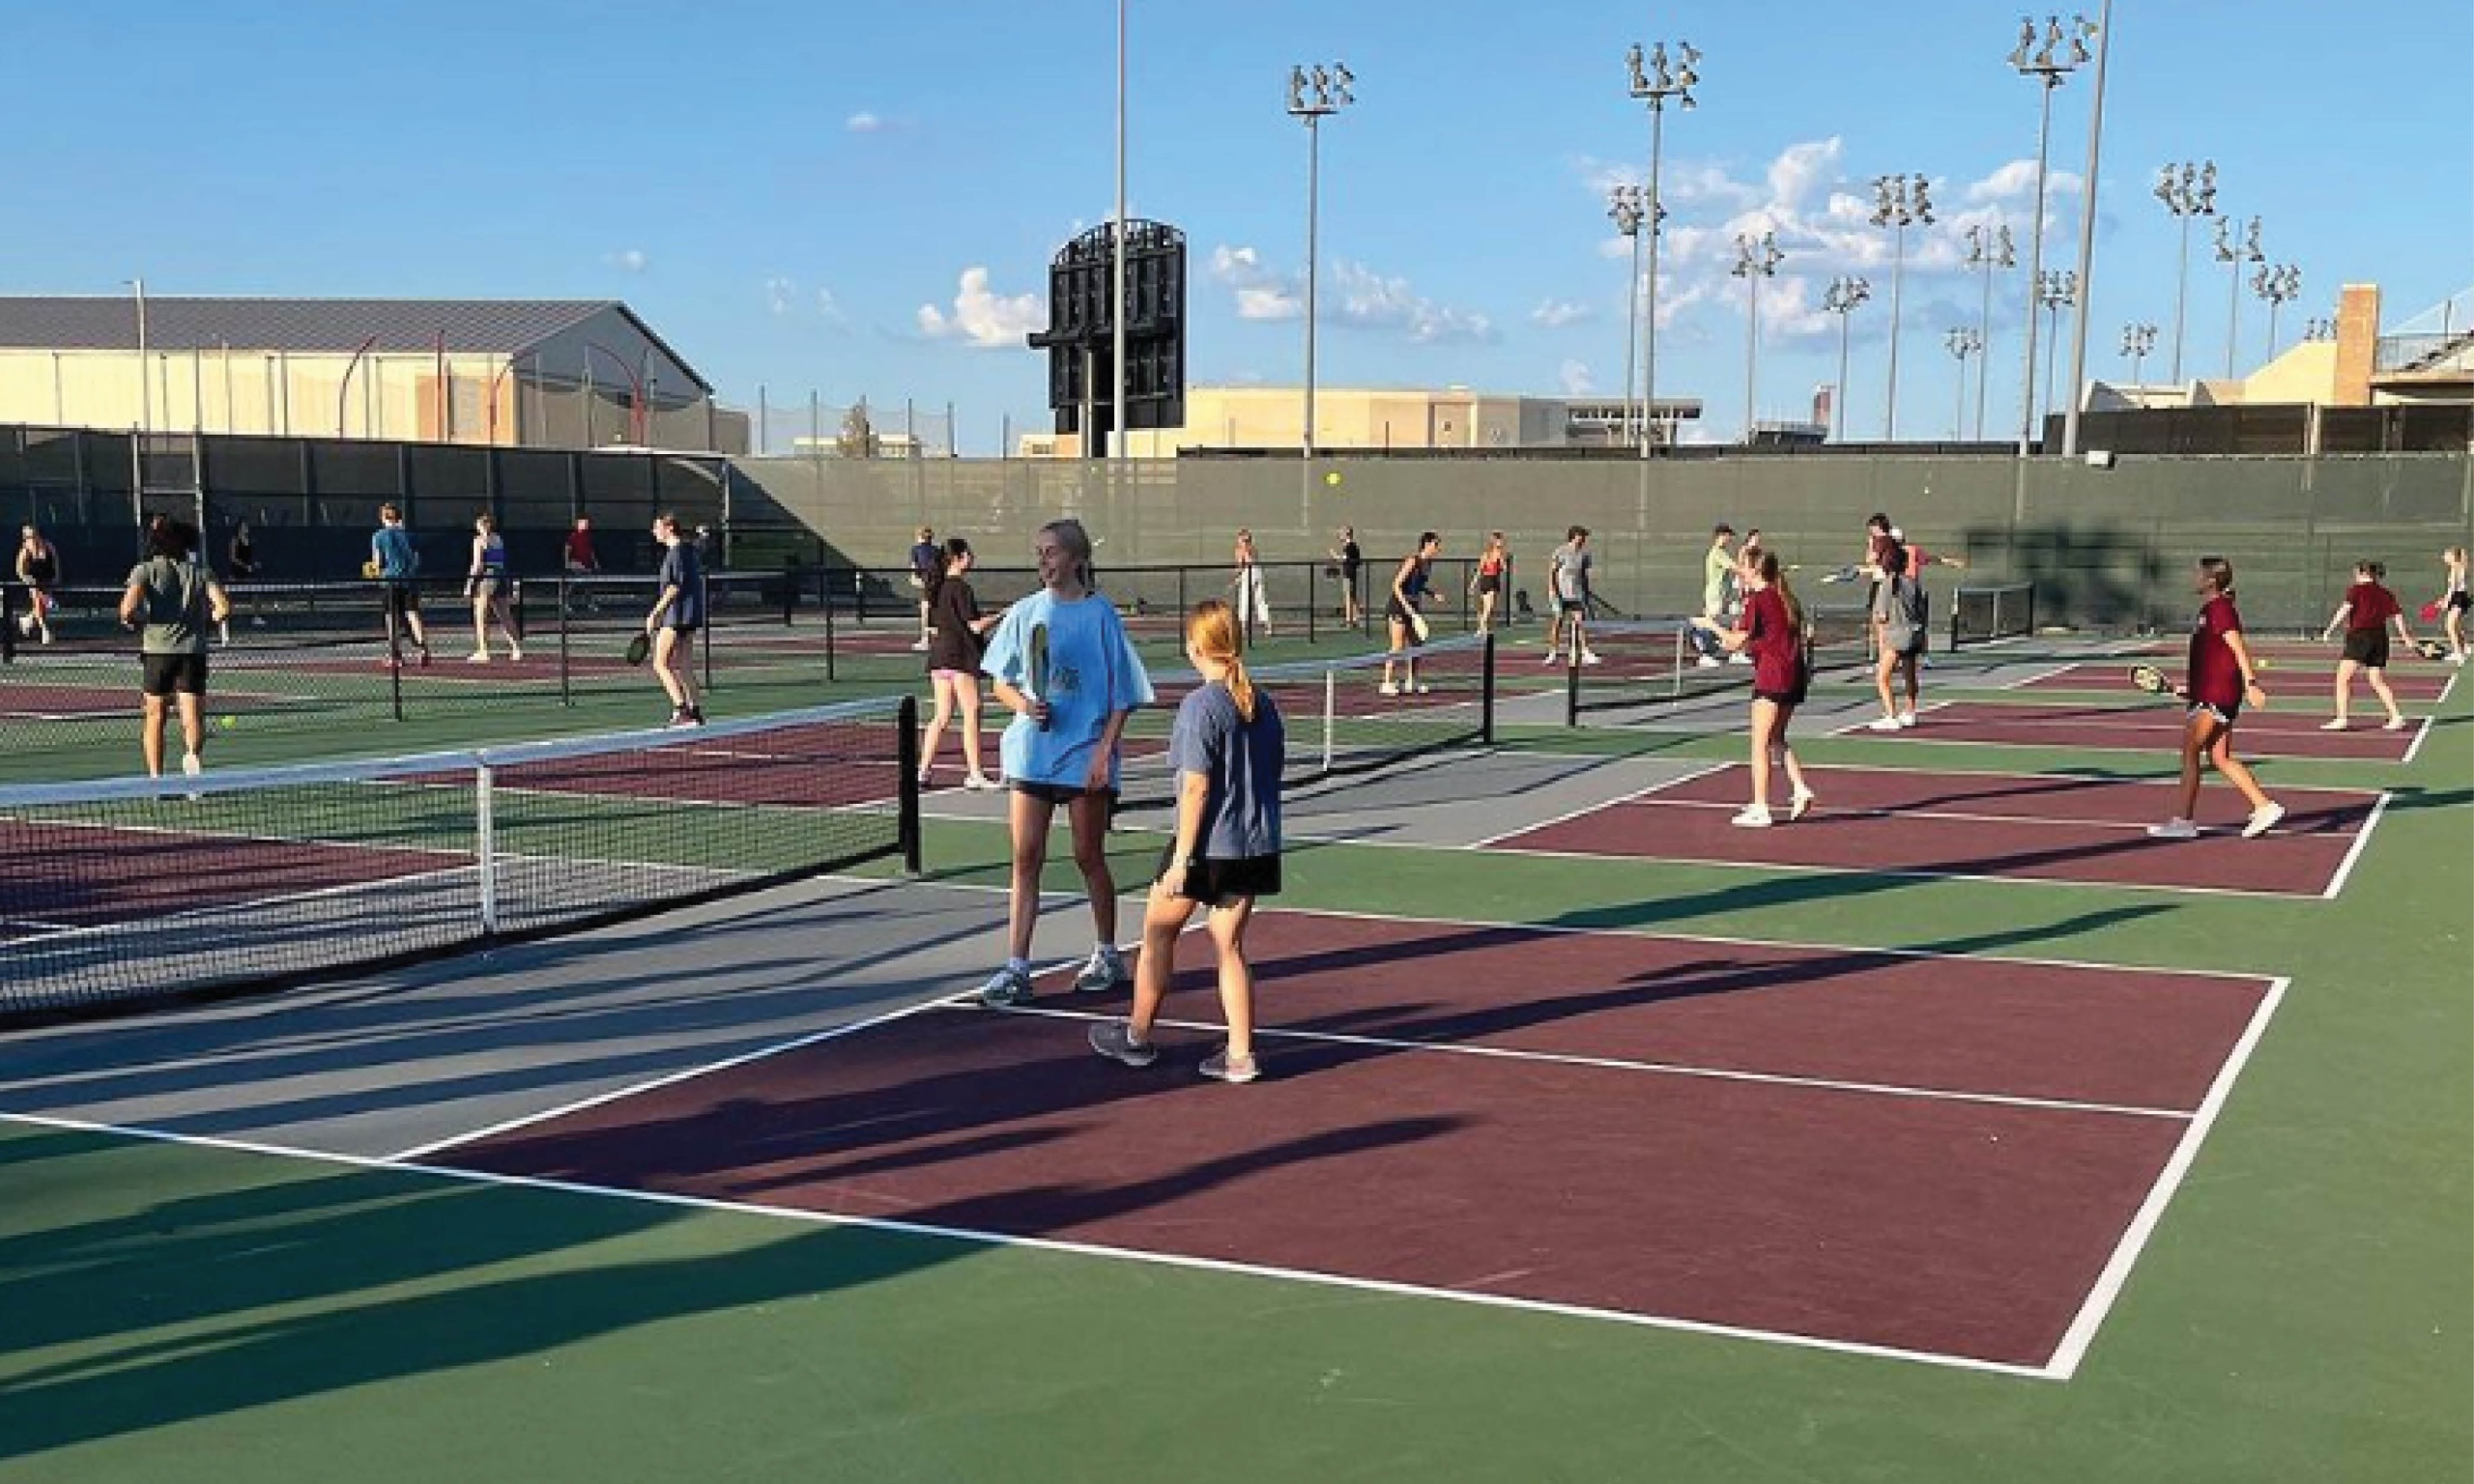 A group of individuals engaged in a game of pickleball on a court, showcasing their skills and enthusiasm